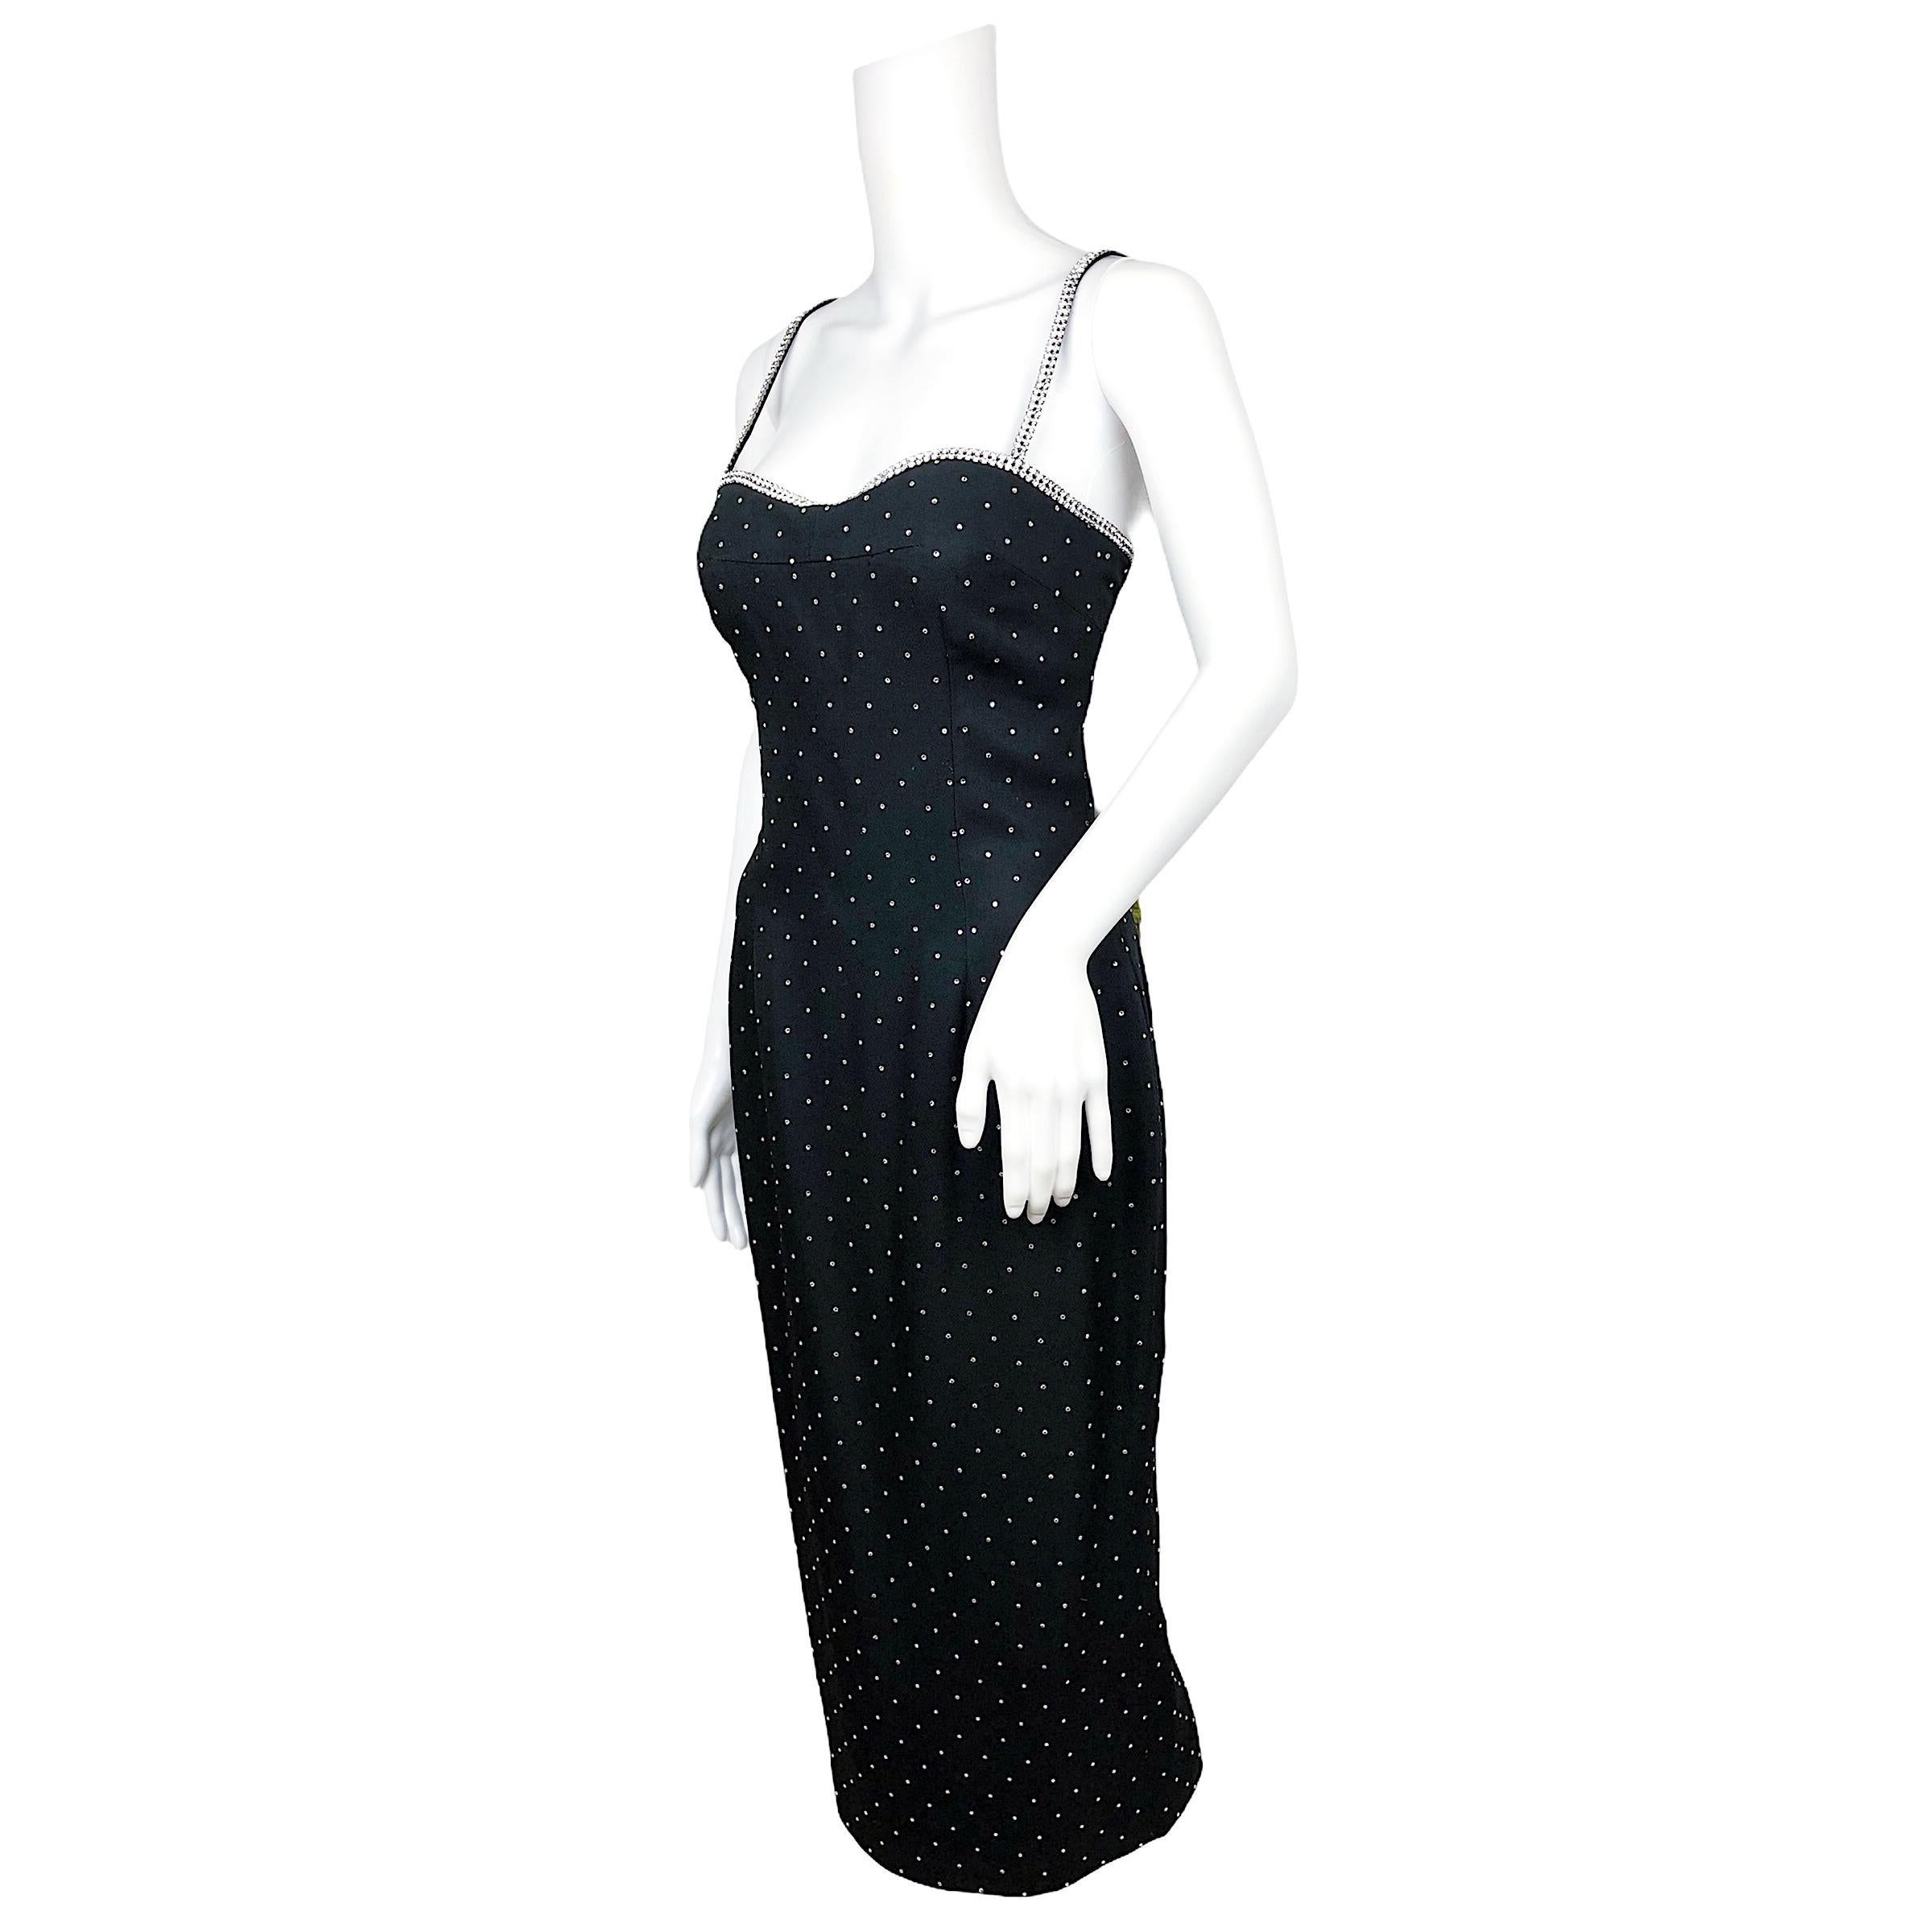 Dolce & Gabbana Spring Summer 1995 black body con dress embellished with crystals on straps and cleavage. Strass allover the body.  The dress was seen on the runway on Nadja Auermann. 
Size is Italian 42 on tag, fits more like an Italian 40/ US 4/